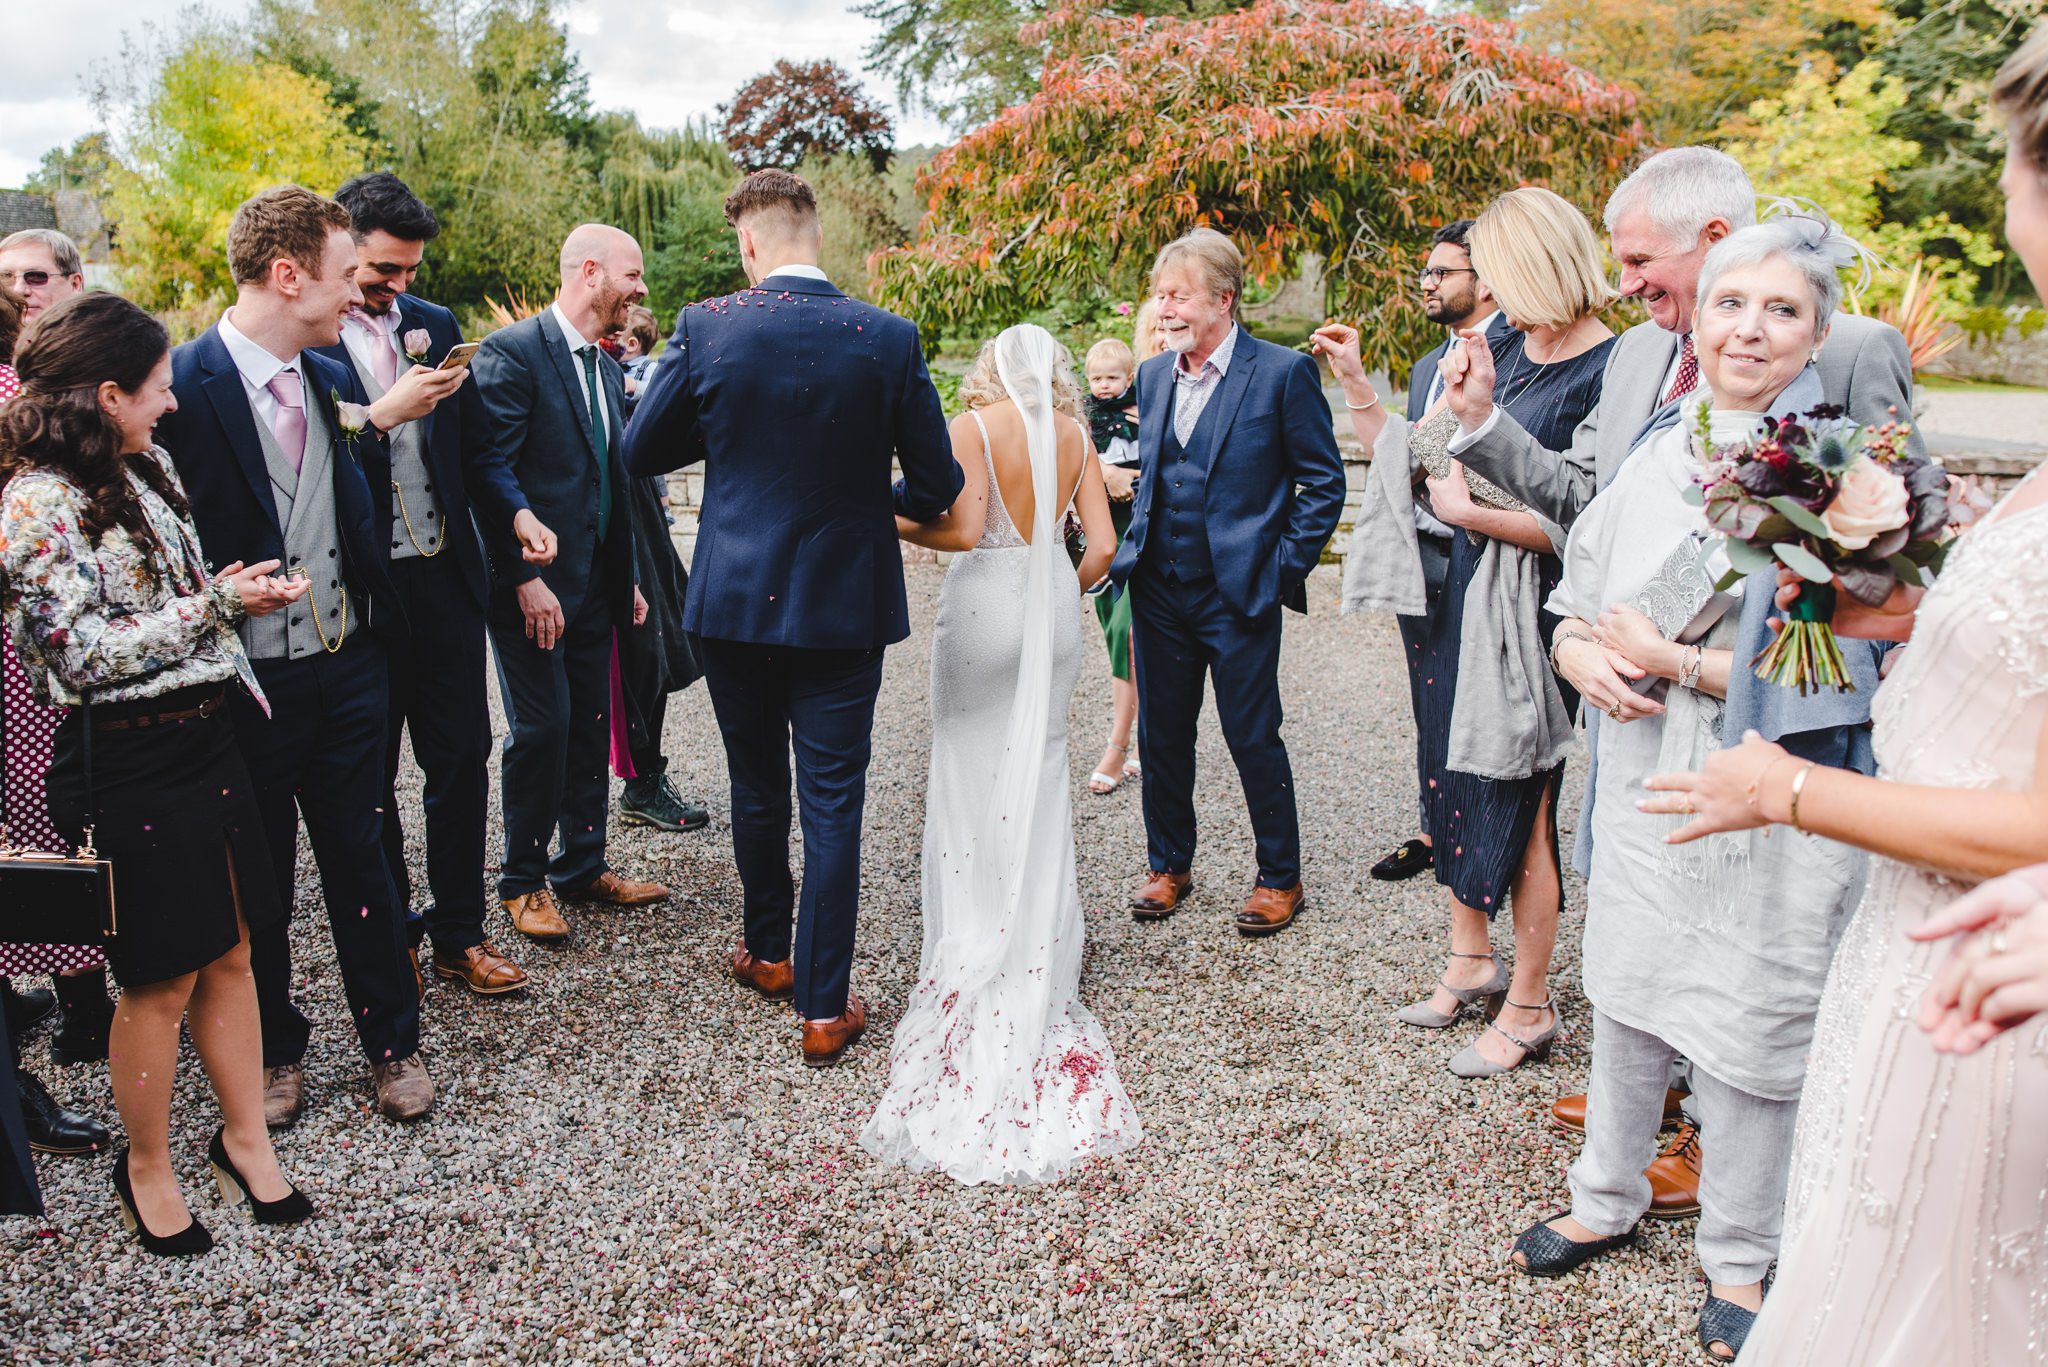 Confetti throwing on the bride and groom at Brinsop Court